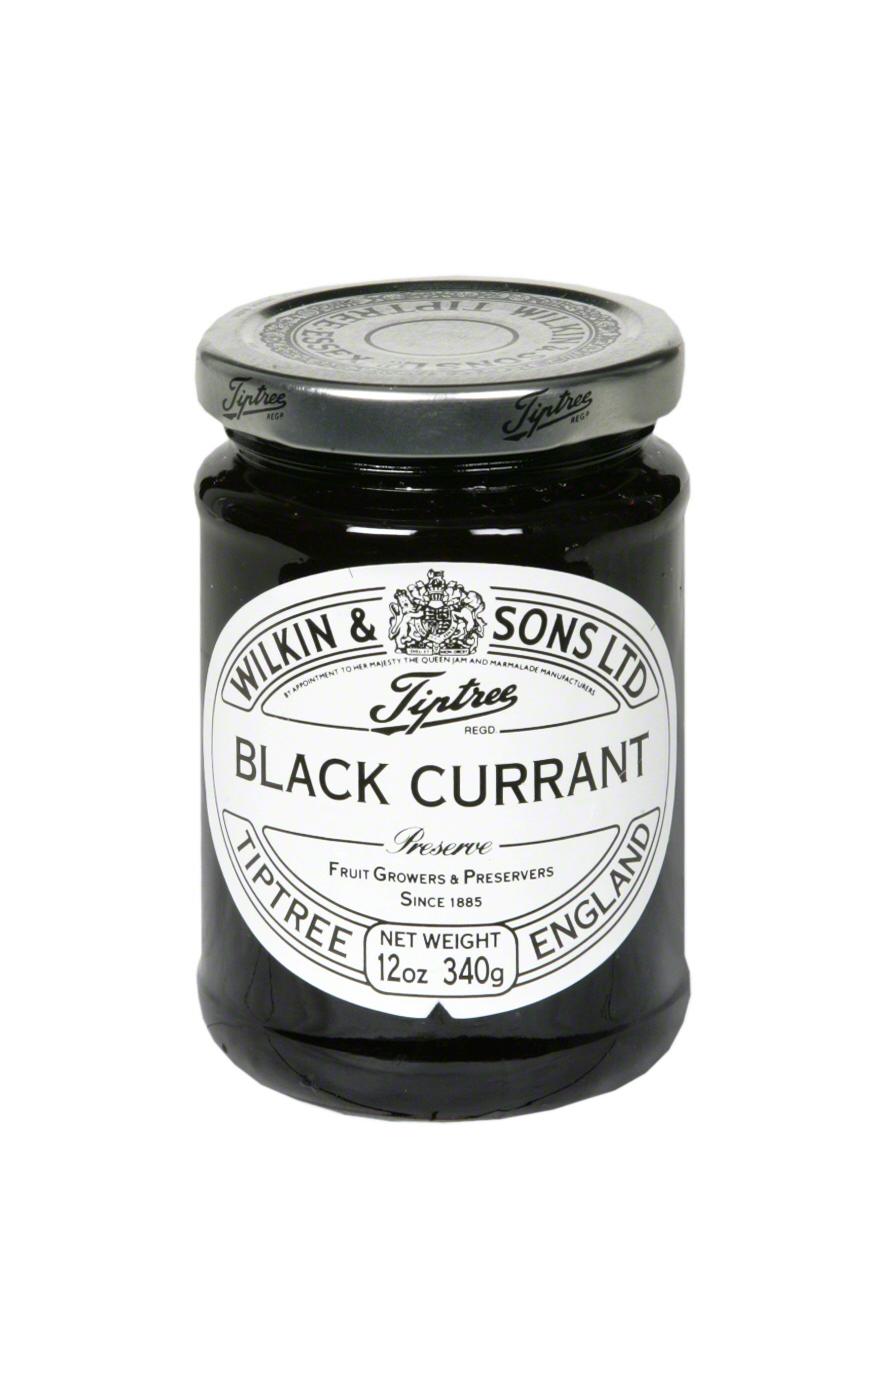 Tiptree Black Currant Conserve; image 2 of 2